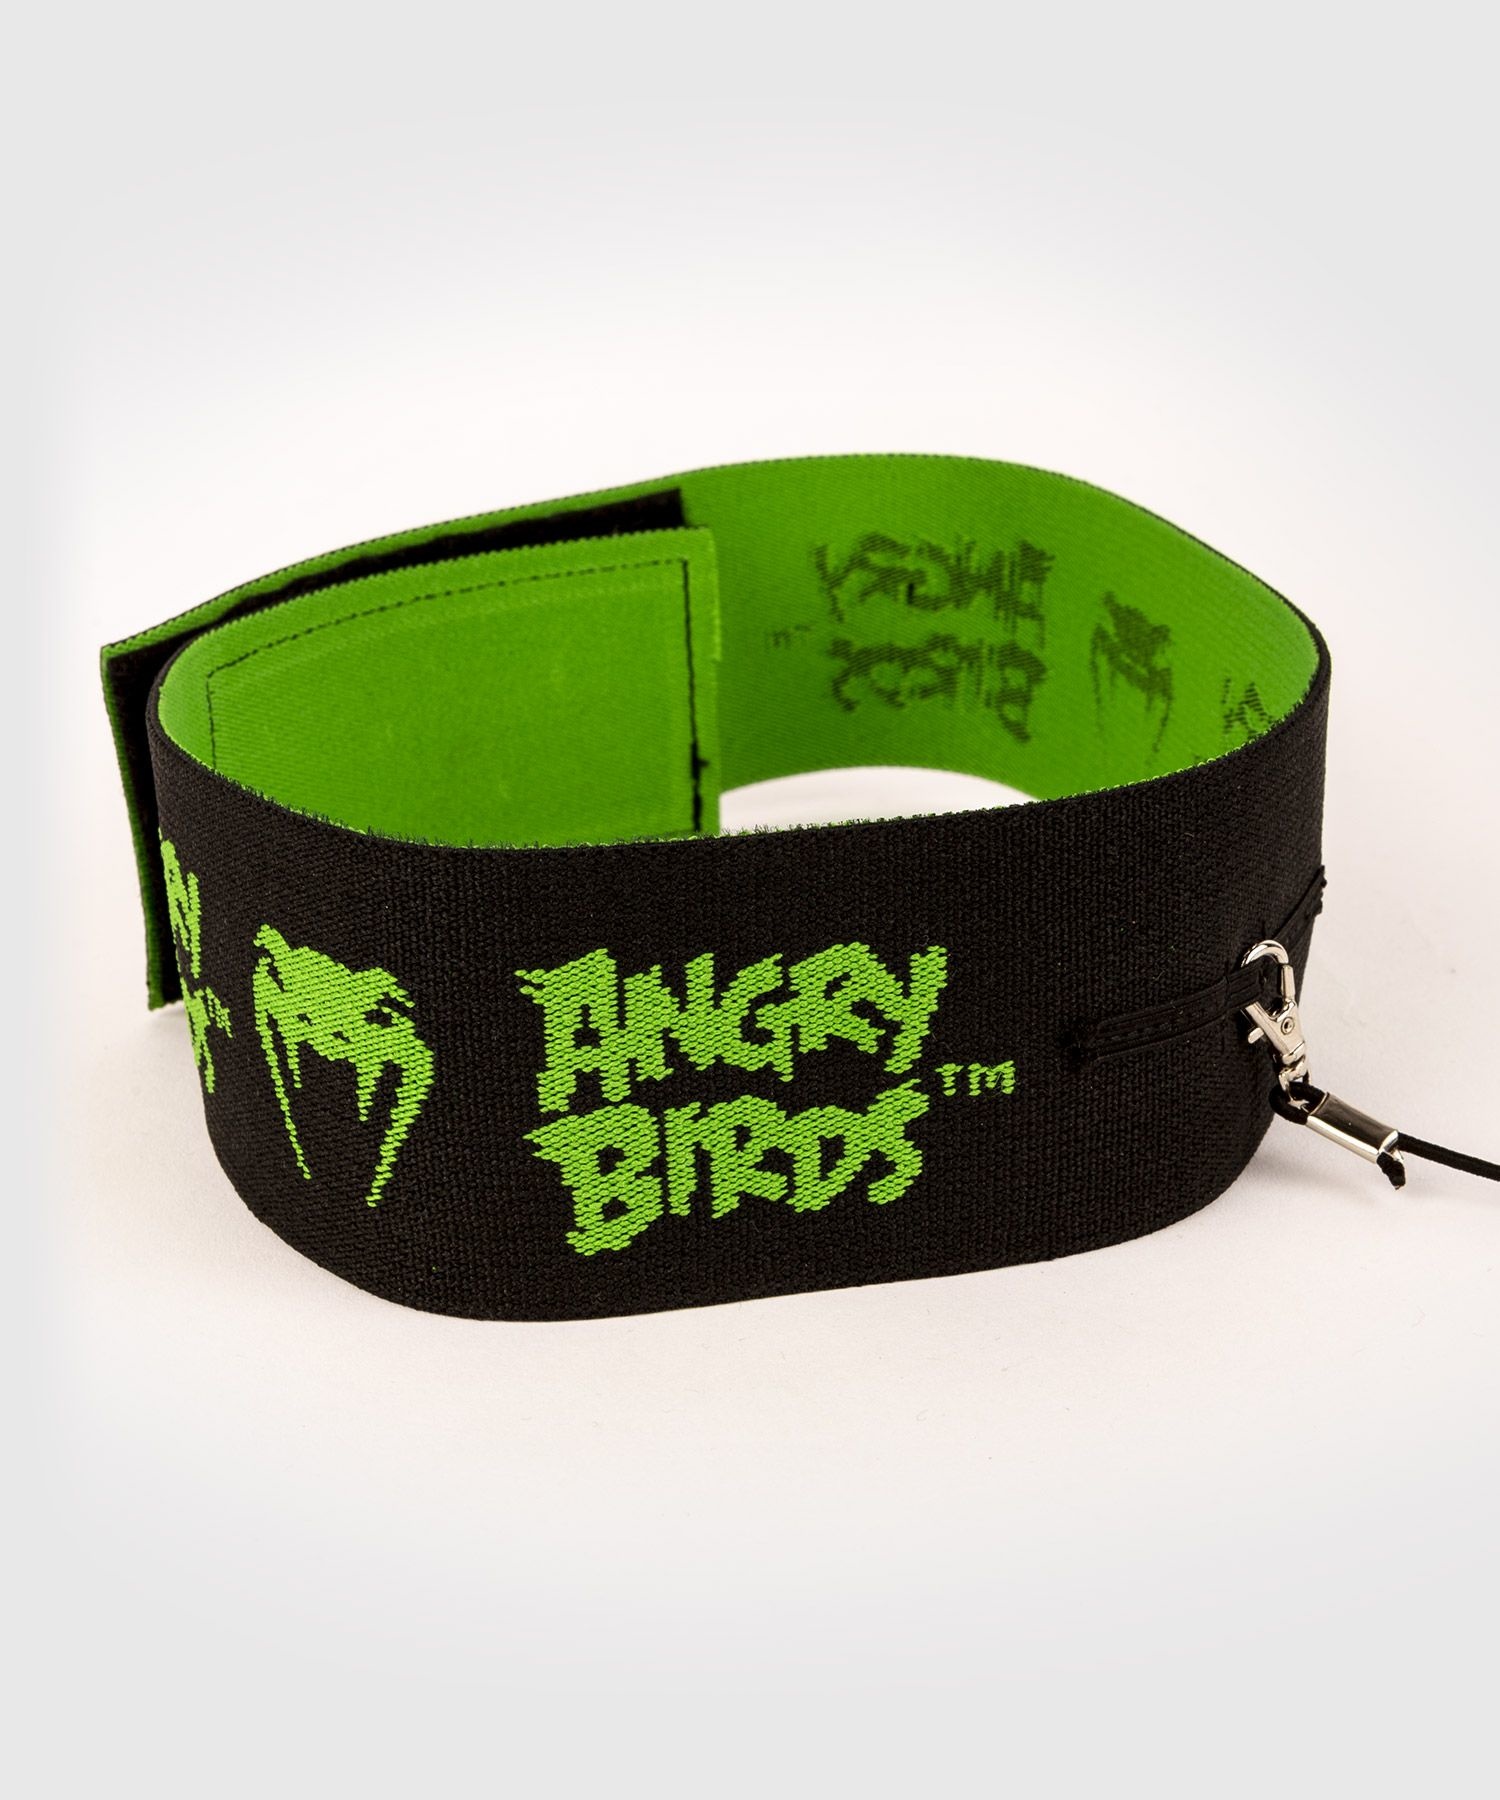 Aggregate more than 76 angry birds bracelet best  cegeduvn